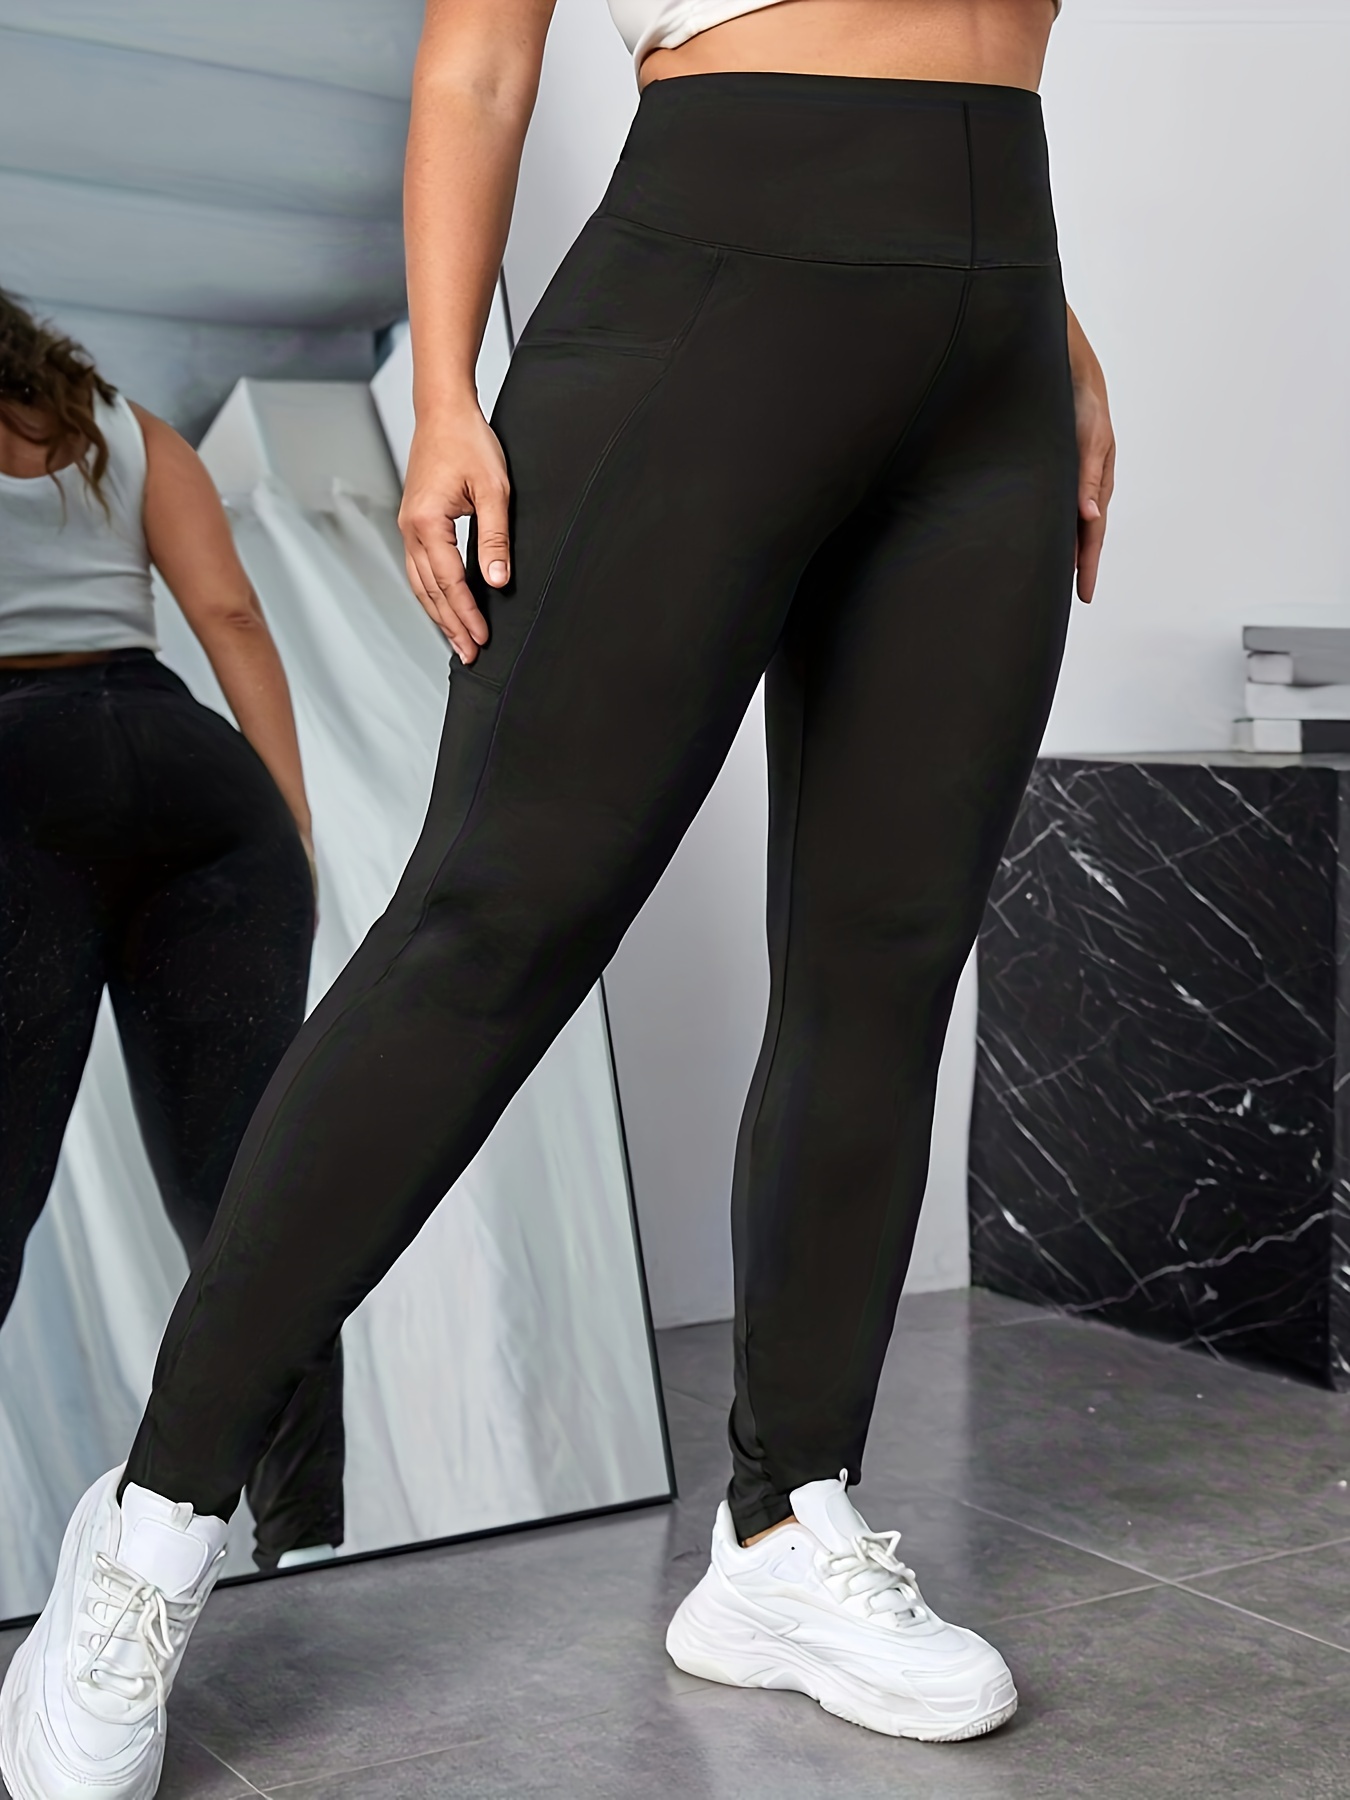 Is That The New Plus Solid Wideband Waist Leggings ??